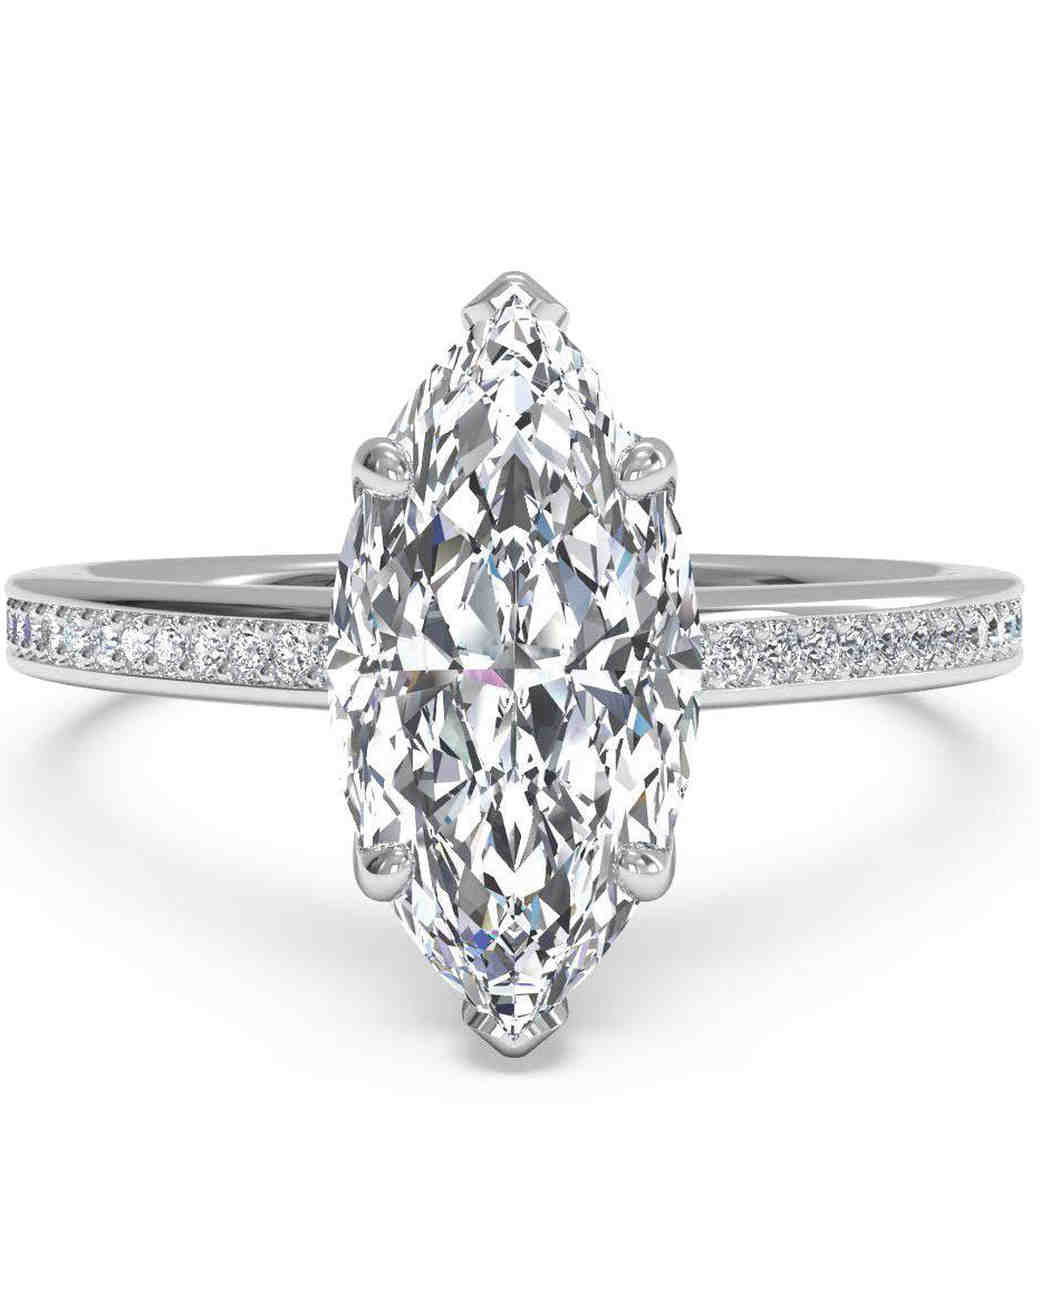 Marquise Diamond Engagement Rings
 Marquise Cut Diamond Engagement Rings